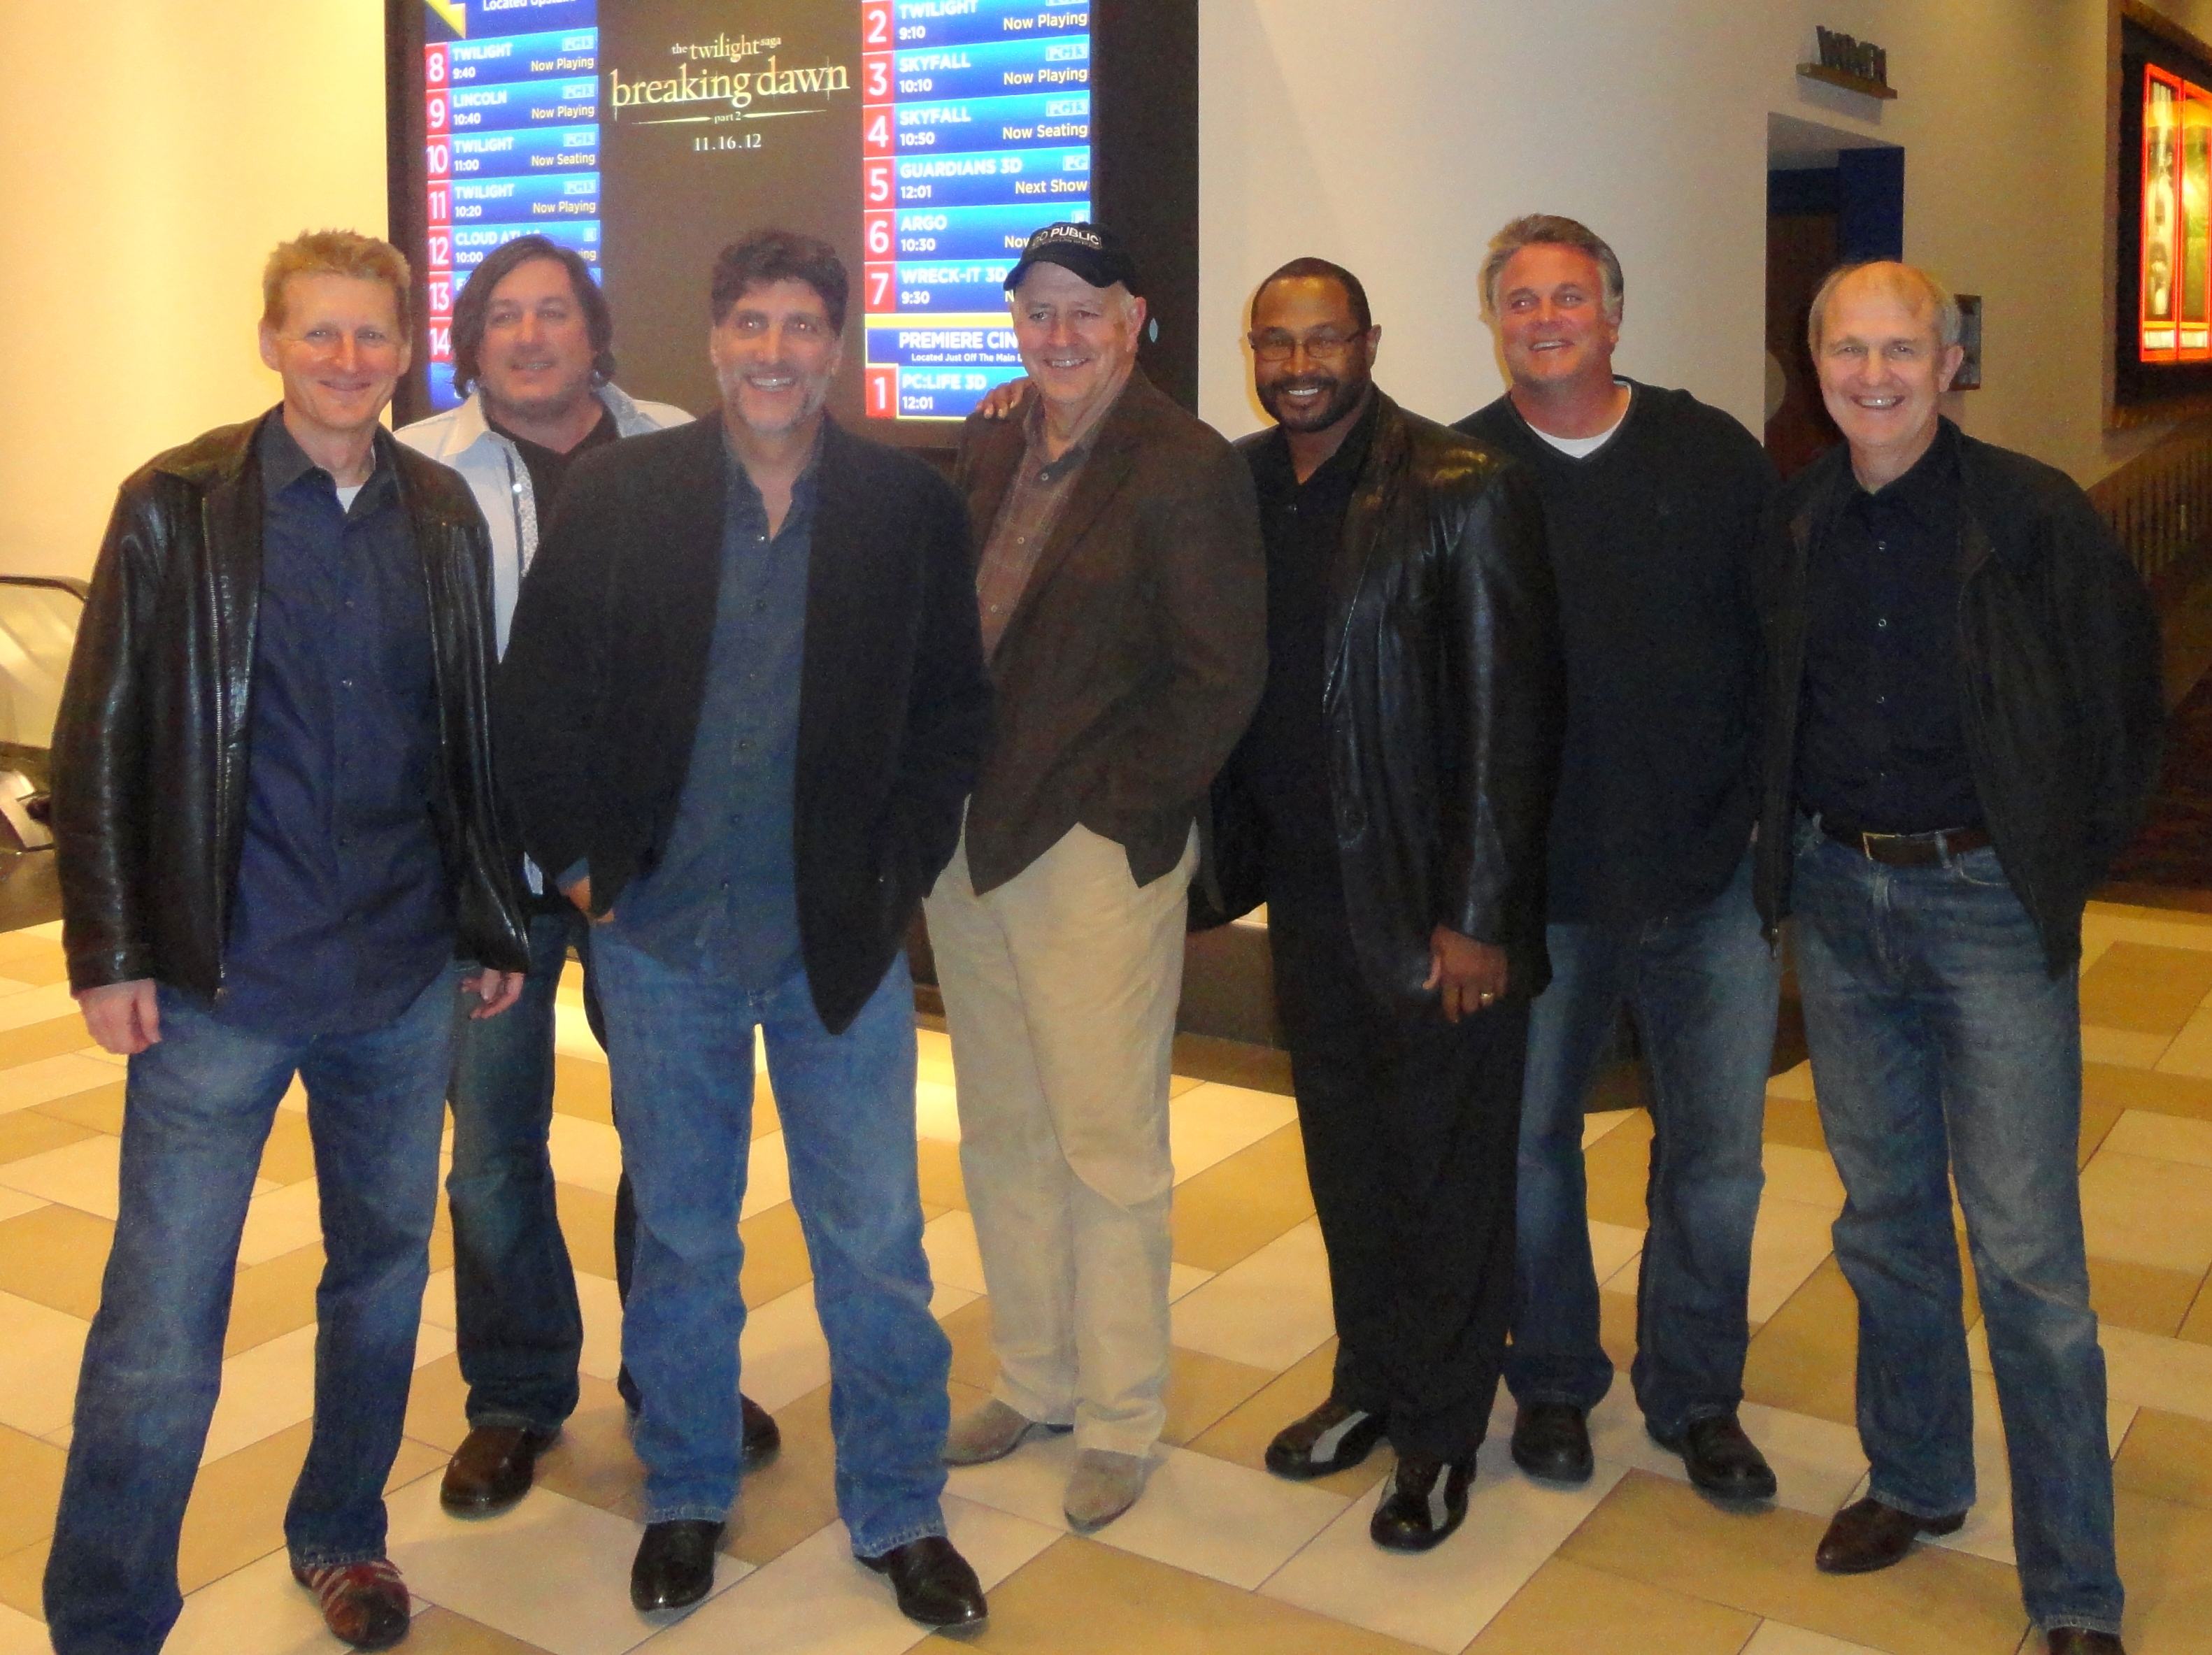 Richard Remppel, Daniel Dupont, Steven Scaffidi, James O'Keeffe, Billy Moore, Dan Goetz and Jim Covell at the LA Live screening of 